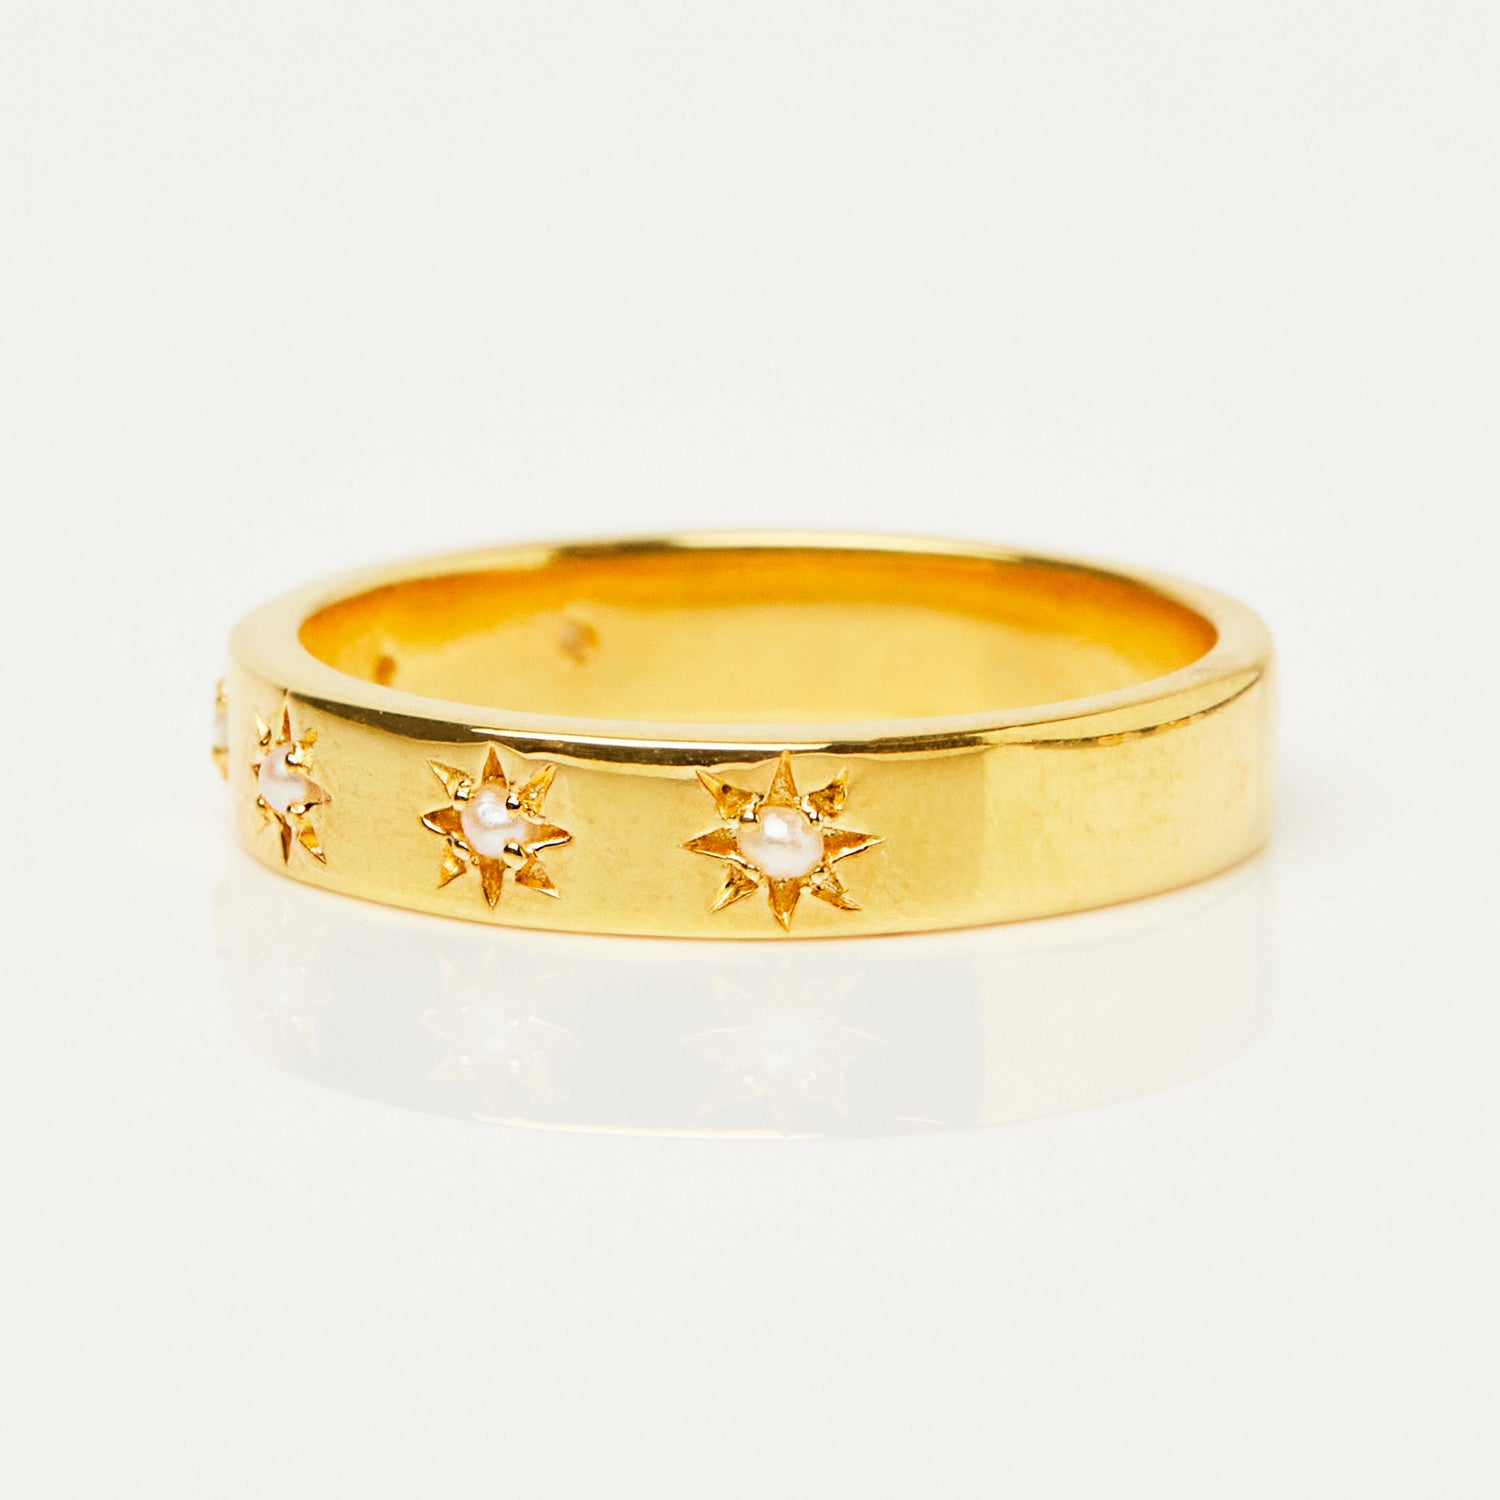 zoe sugg intentions pearl luck ring in gold